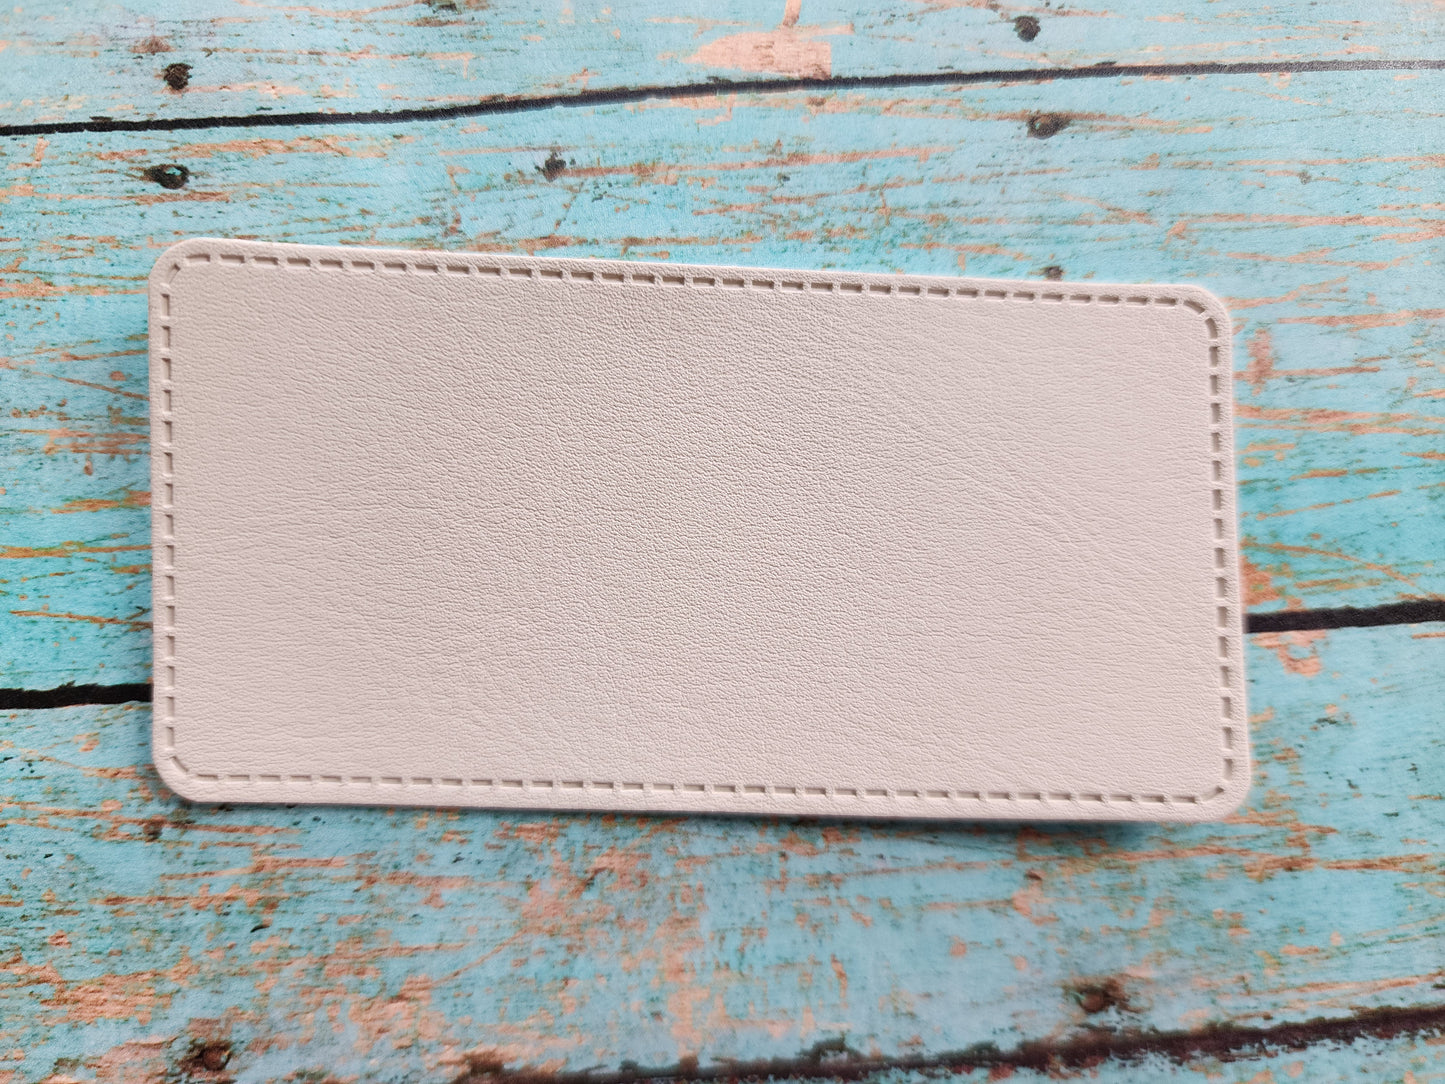 Elongated Skinny Rectangle 4" x 2" Retro Sandstone or Tan Leather Hat Patch Sublimation Blank! Laserable!